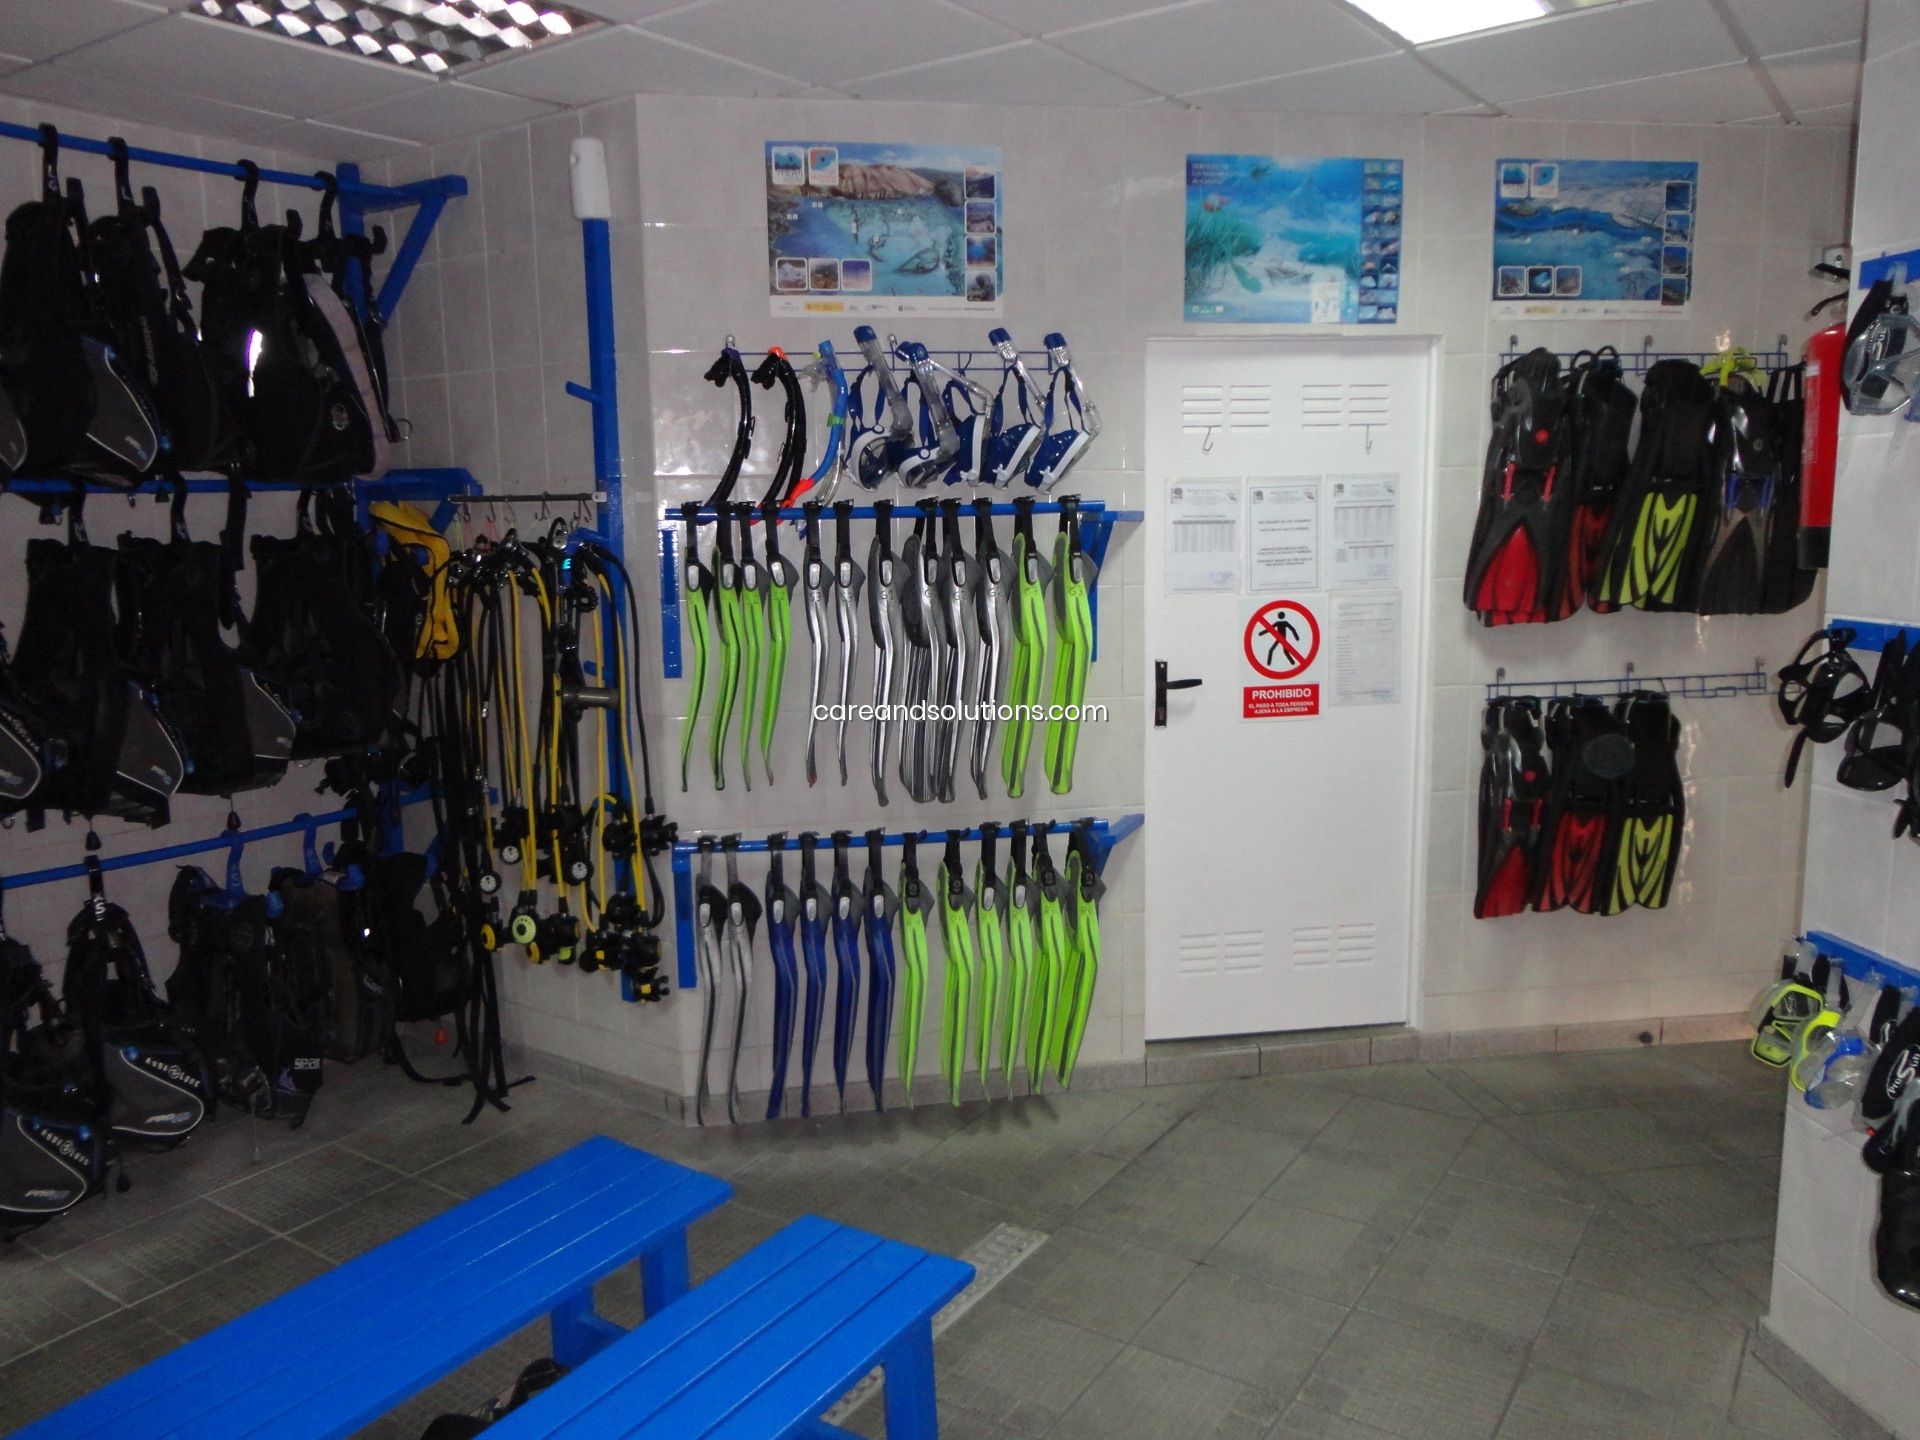 Dive Center For Sale - Great Opportunity, PADI / SSI Dive Center and Shop for Sale in Puerto de Santiago, Tenerife, Spain. CSLOC24642 Certificate of Excellence TripAdvisor Rating.